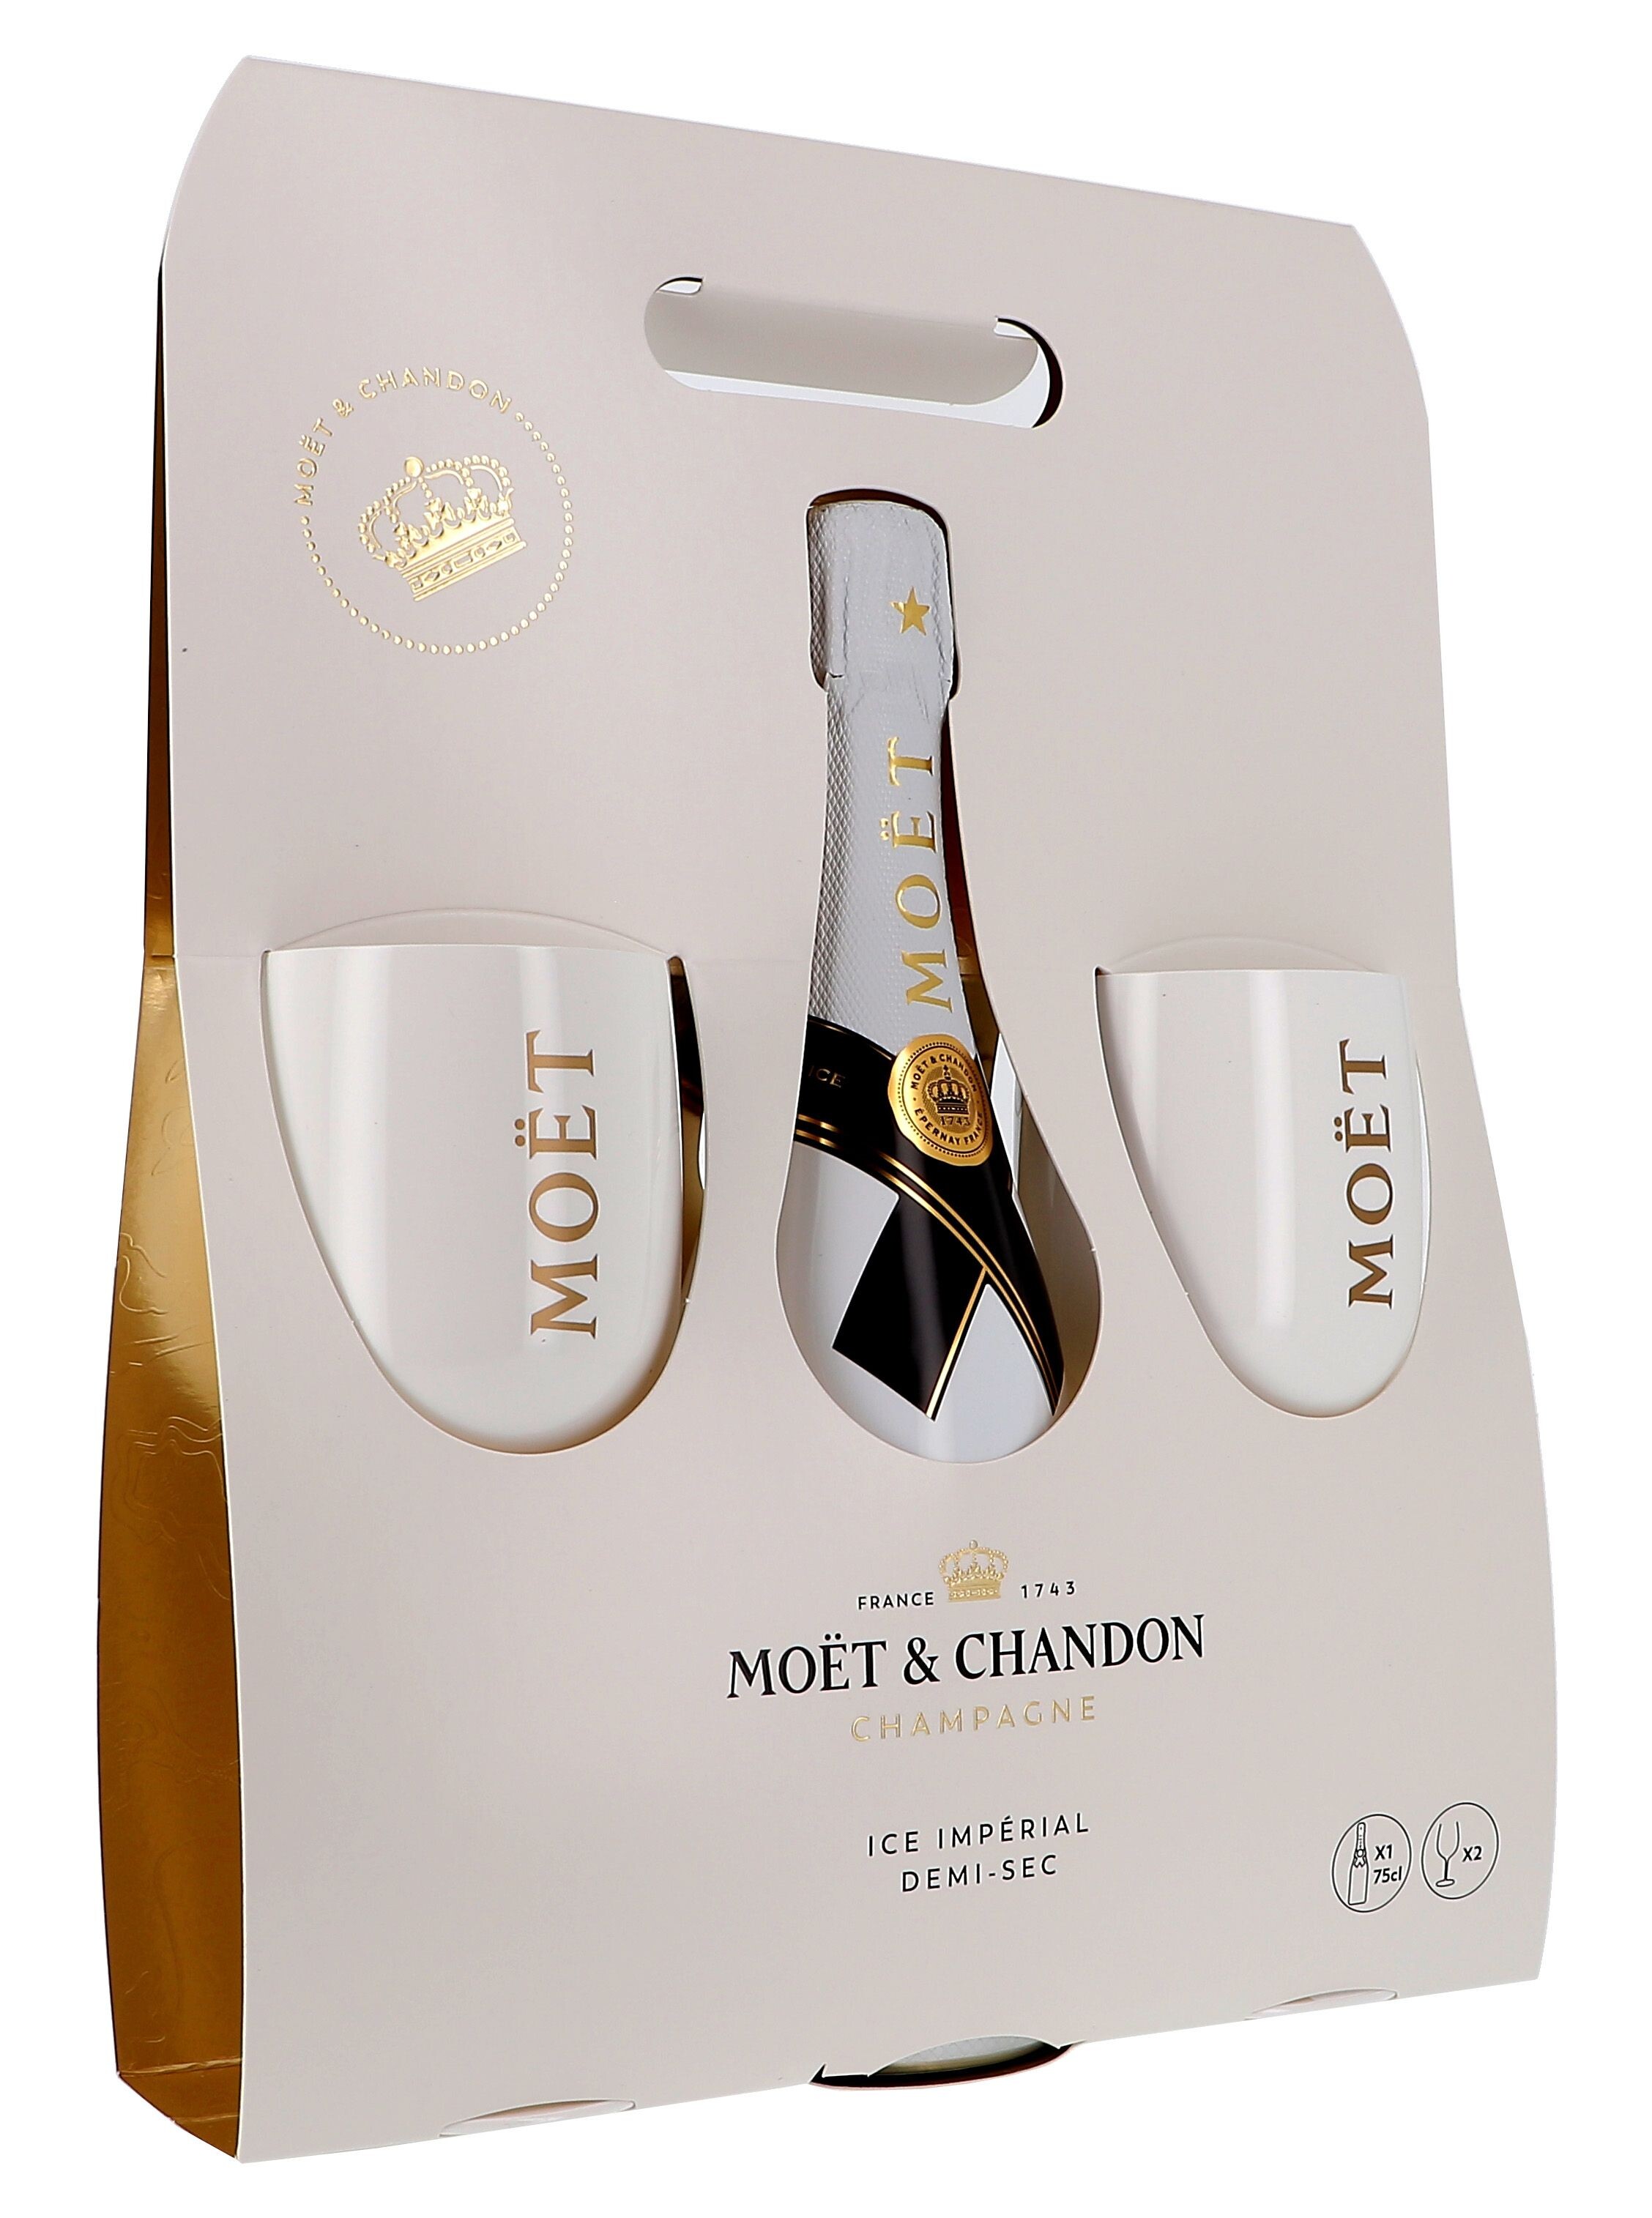 Champagne Moet & chandon Ice Imperial 75cl + 2 glasses Giftbox